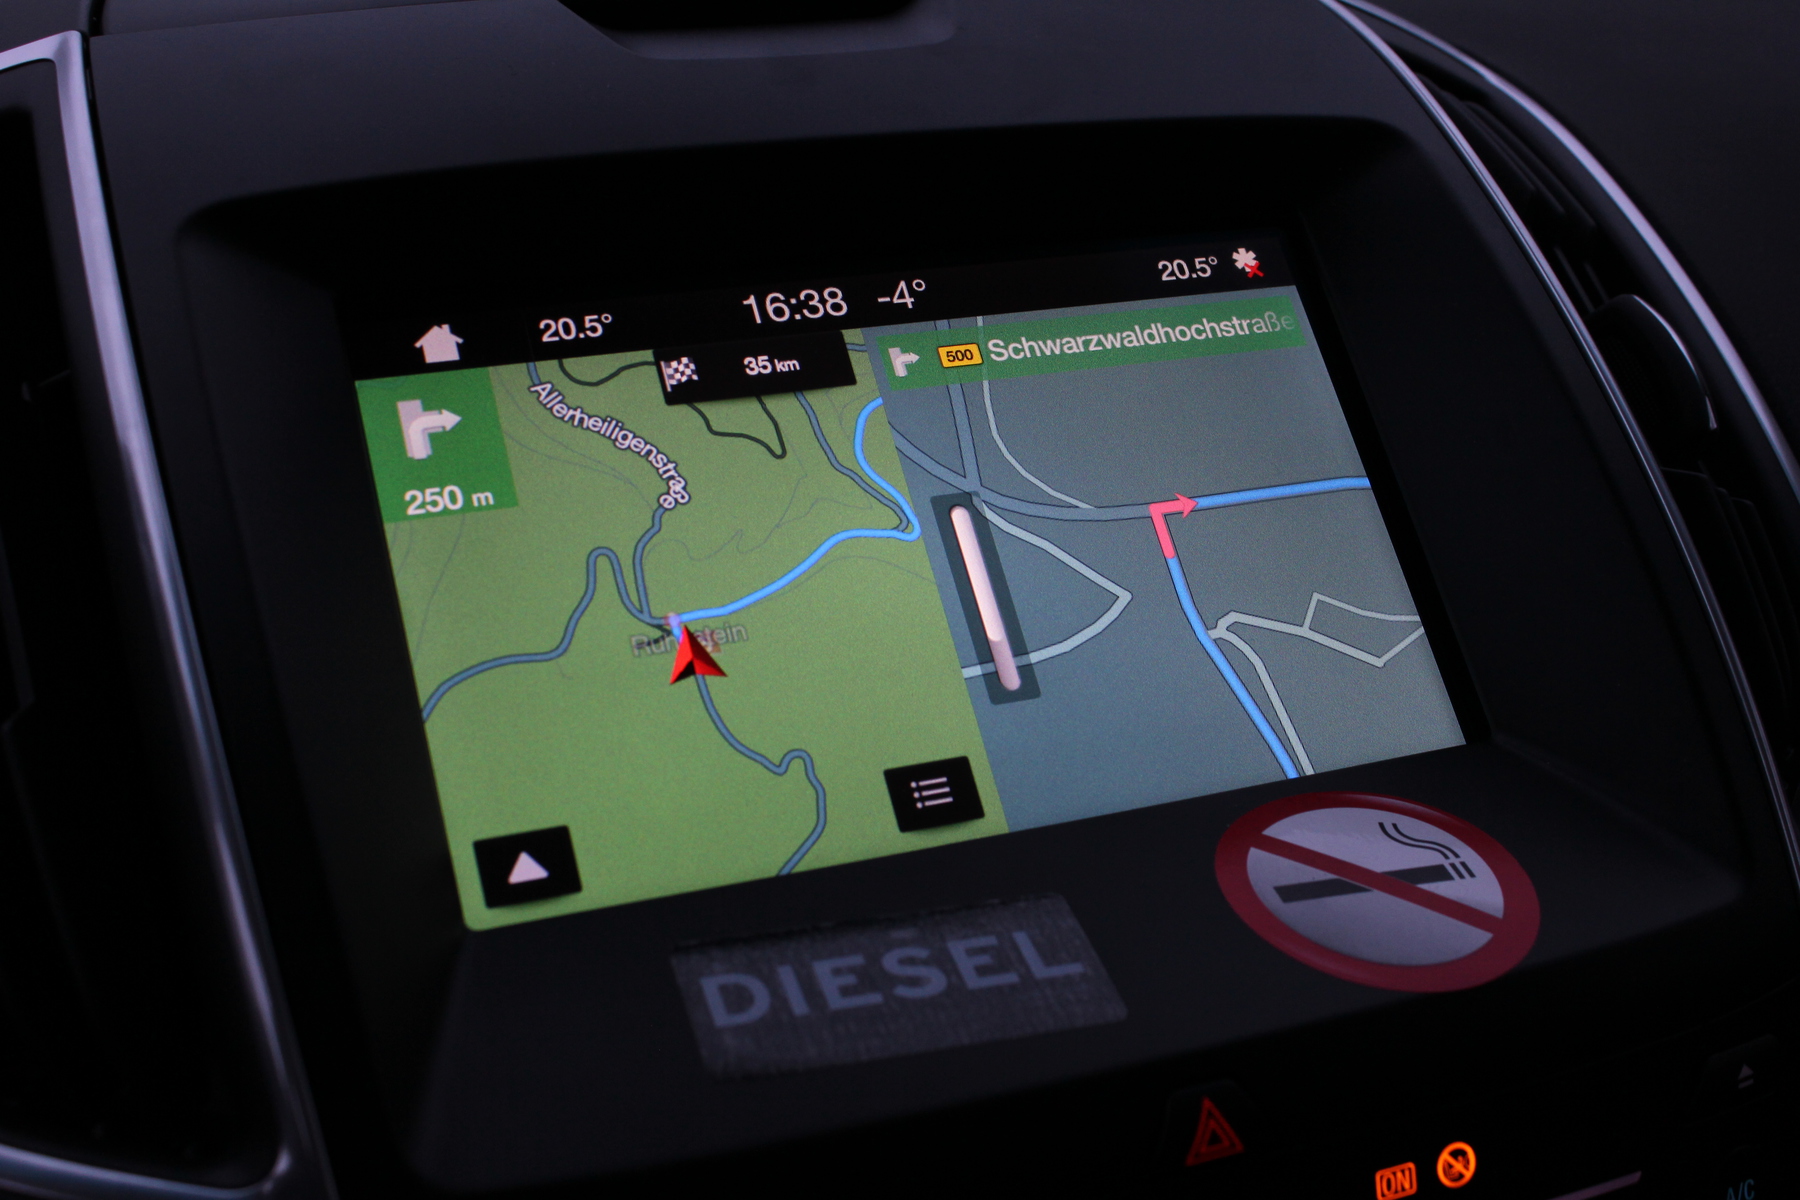 Navigation console in the Ford Edge review—it displays and reads German street names allowed in English